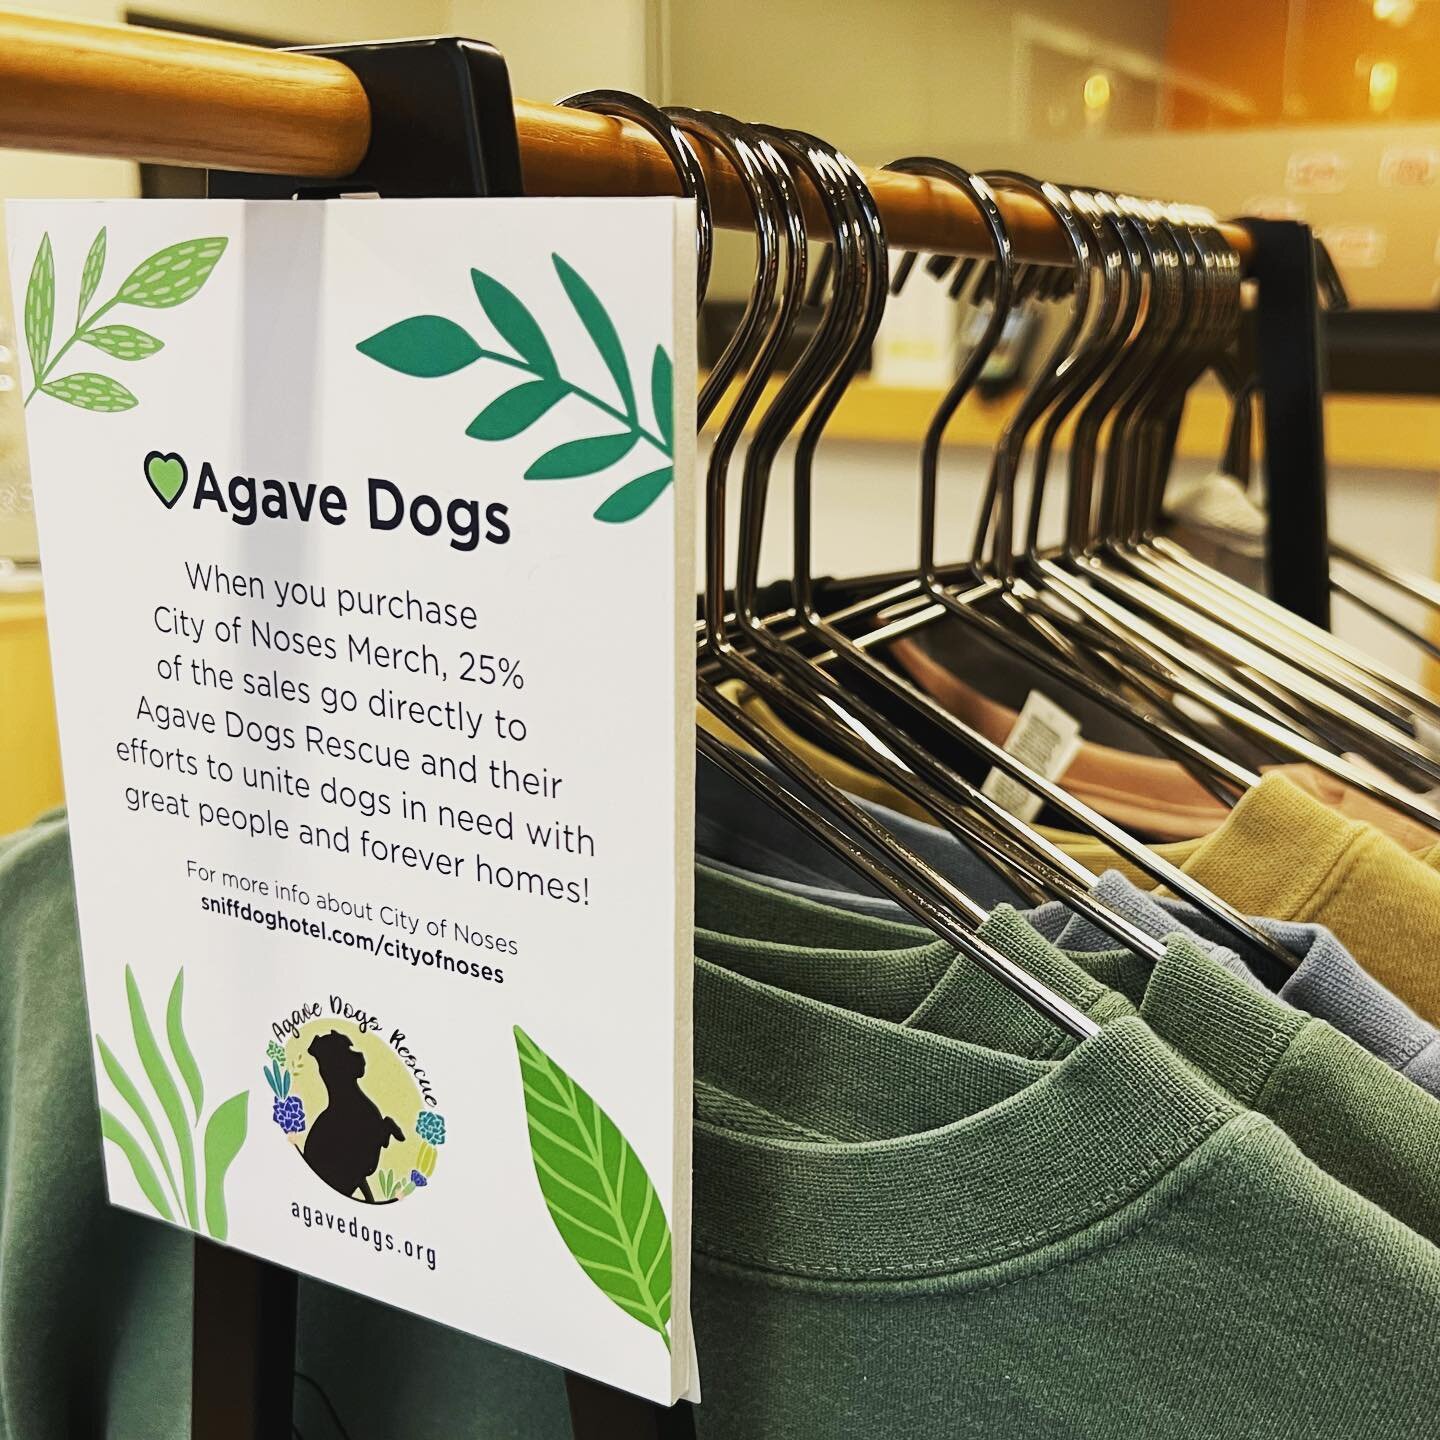 For the next few months 25% from the sales of City of Noses Merch will assist @agavedogsrescue and their efforts to provide dogs🐶 in need with loving forever homes 🏠💕